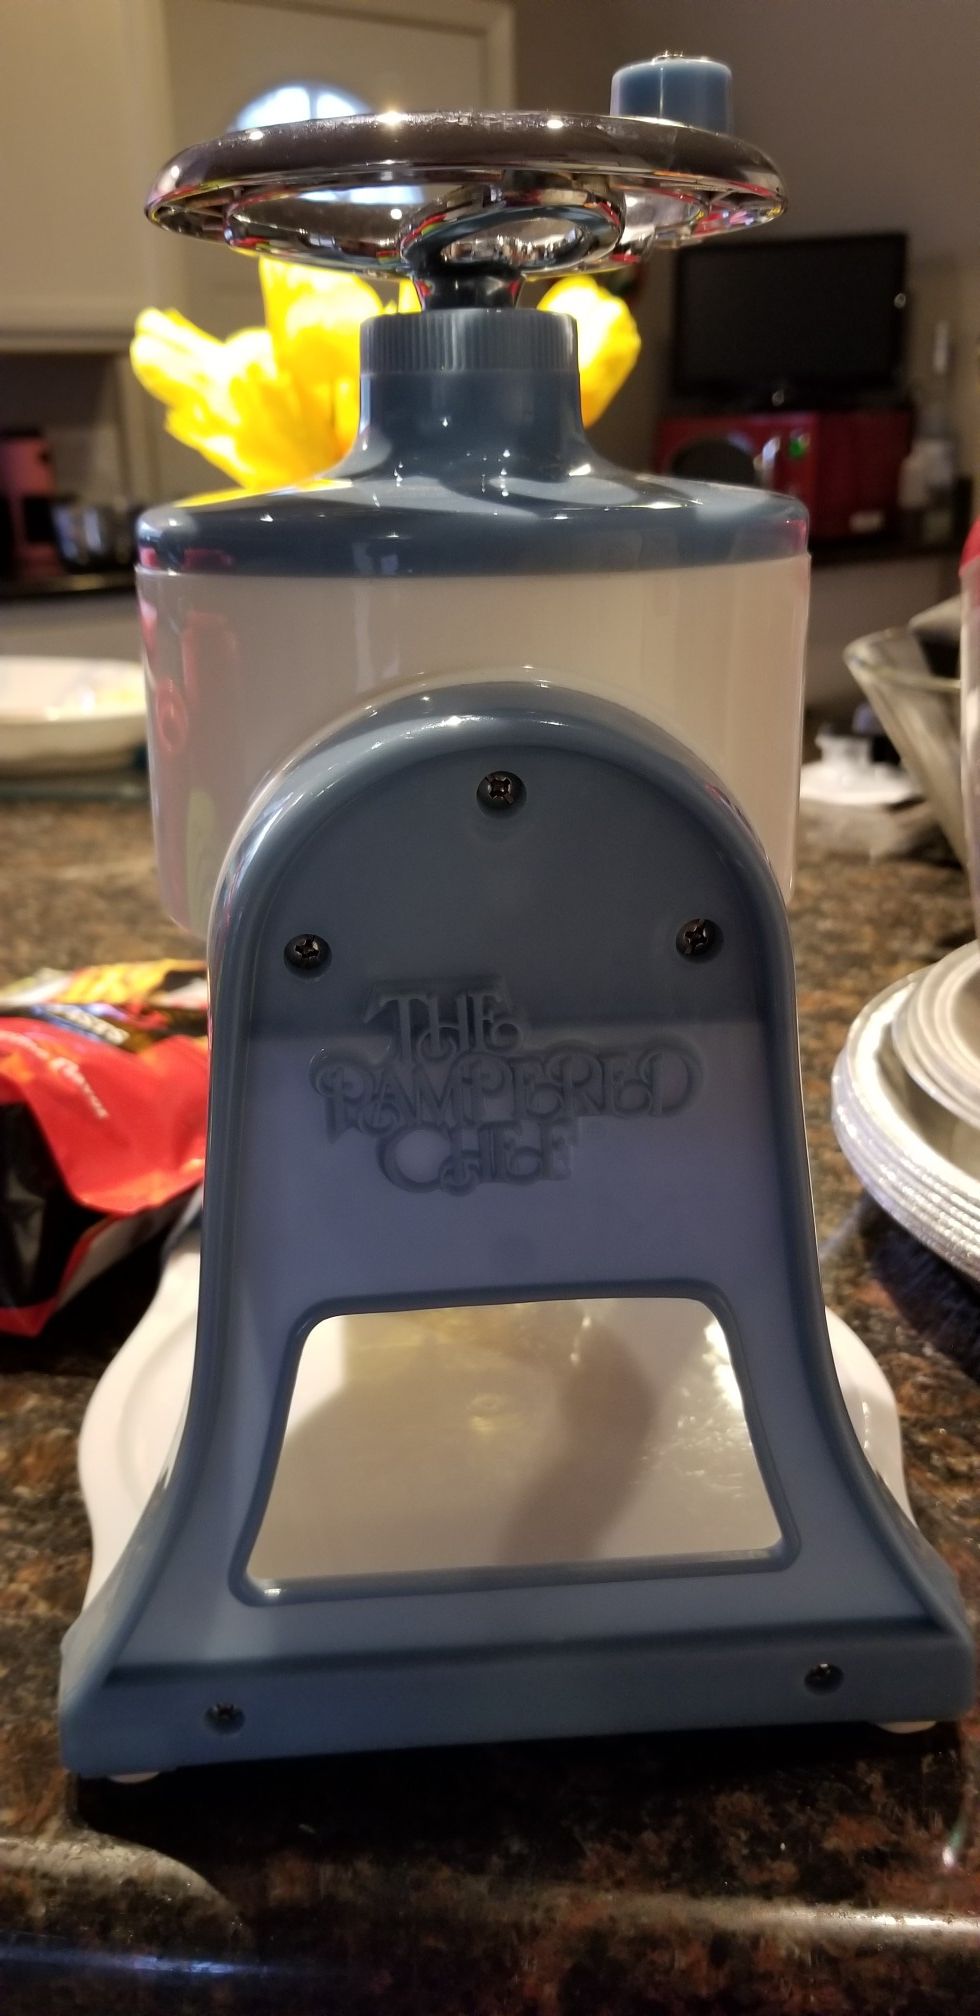 Pampered Chef ice shaver